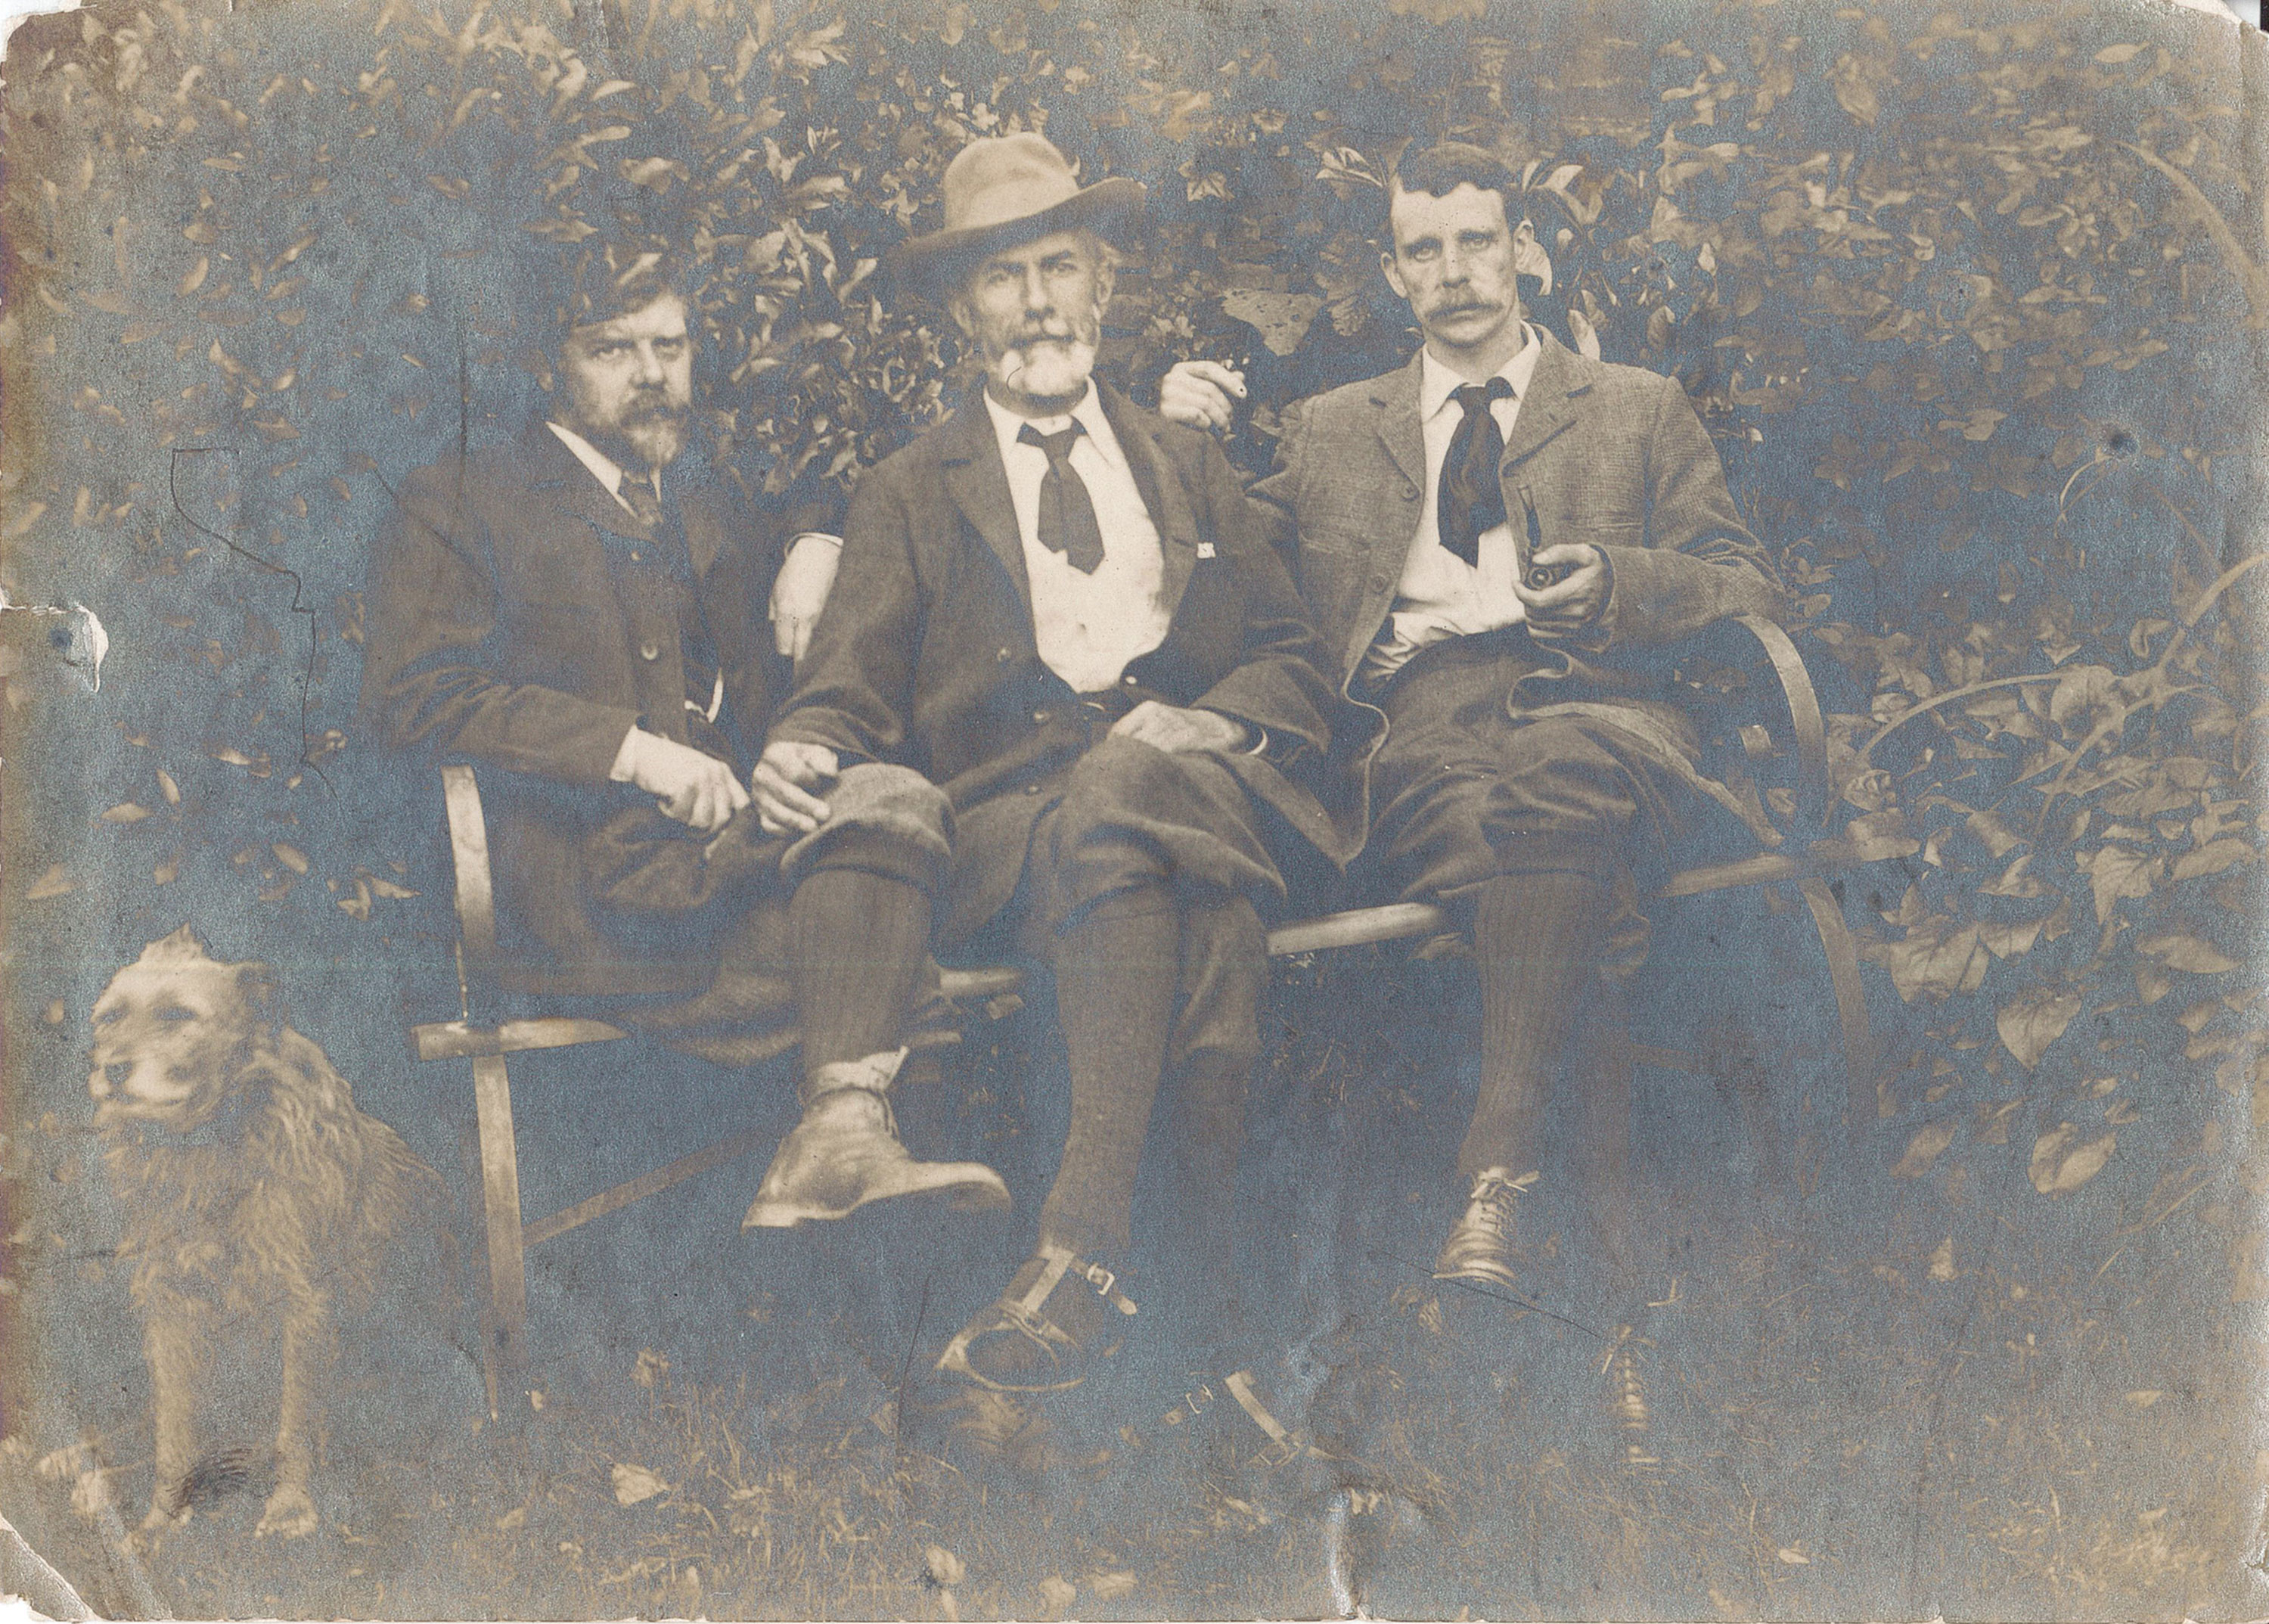 Edward Carpenter, George Merrill, and G. Hukin seated outdoors